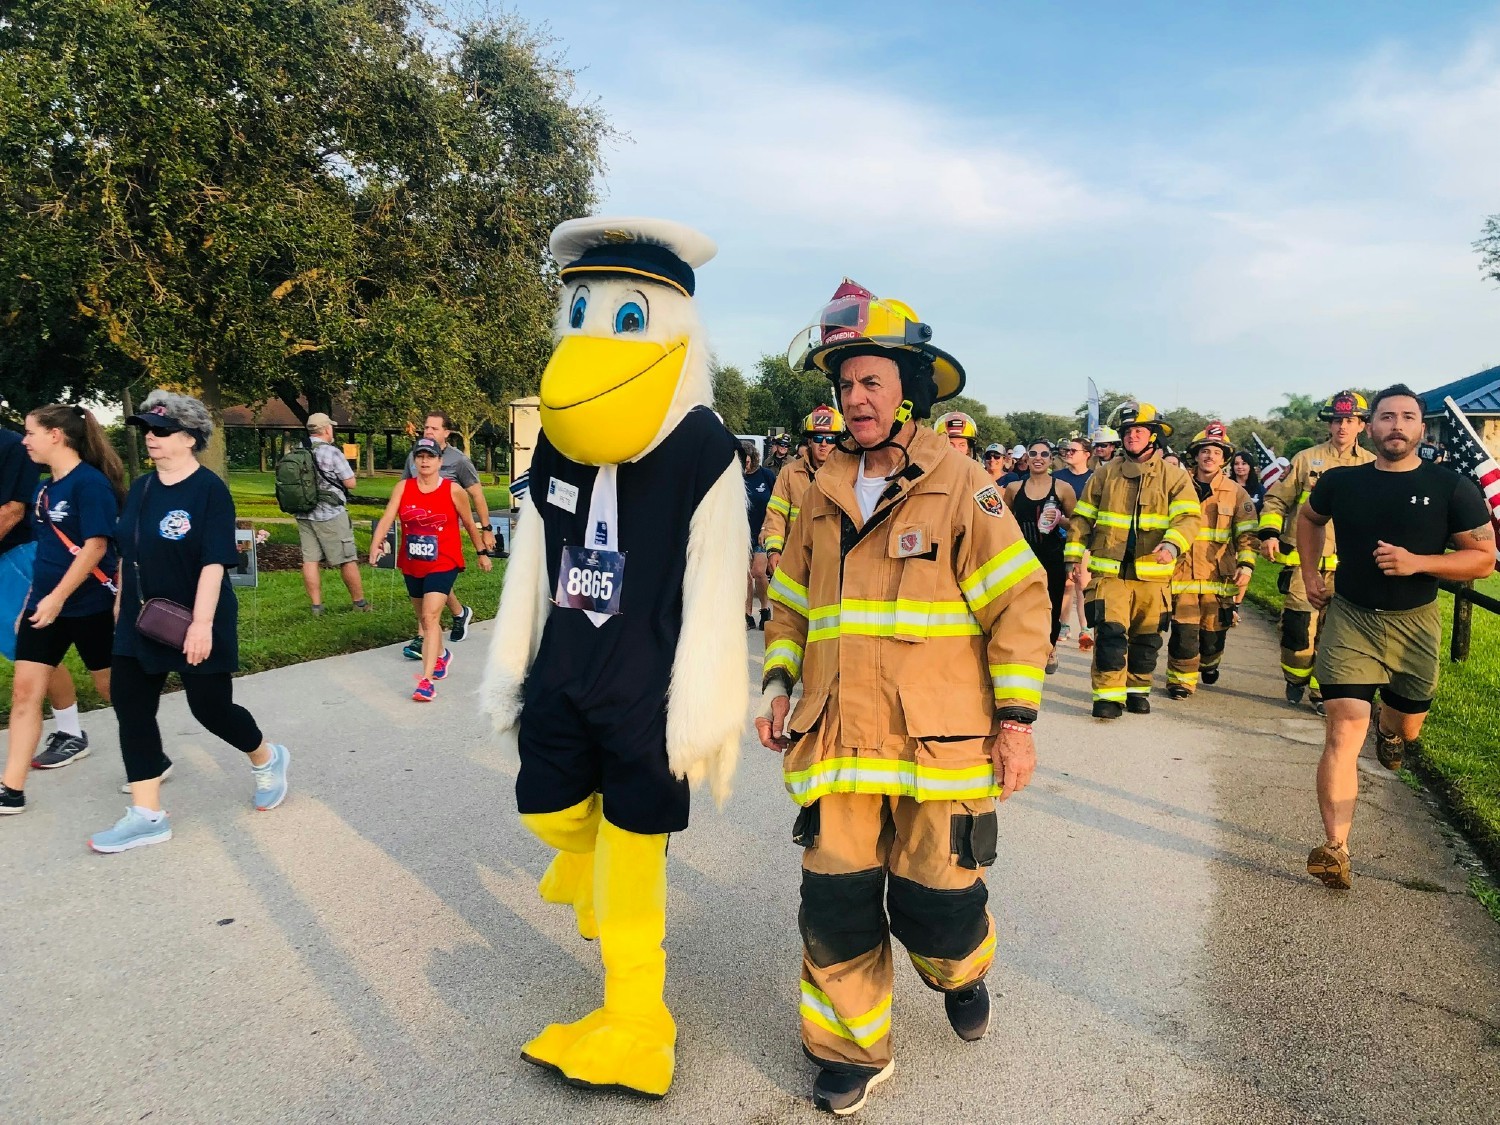 Our Bank President, Bill Penney, runs the local Tunnel to Towers Run in full-fire gear with our mascot Mariner Pete.